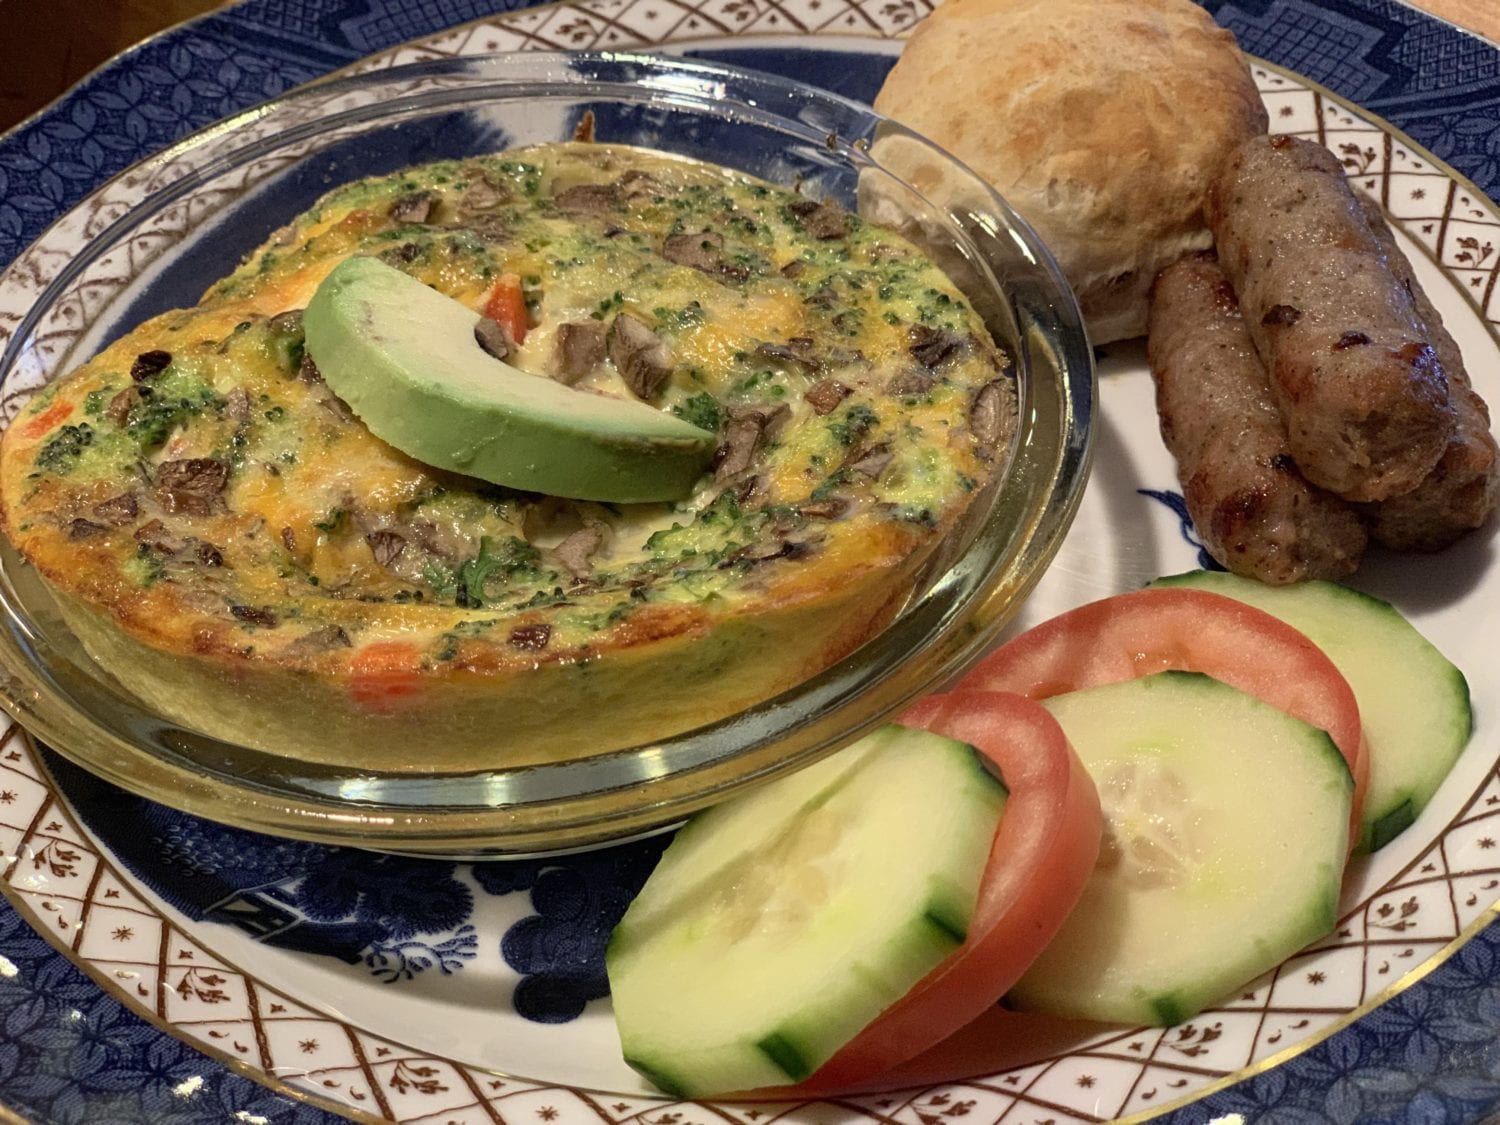 broccoli & cheddar frittata with sausage, biscuit, veggies... breakfast at the 1795 Acorn Inn in Canandaigua is always included in your stay